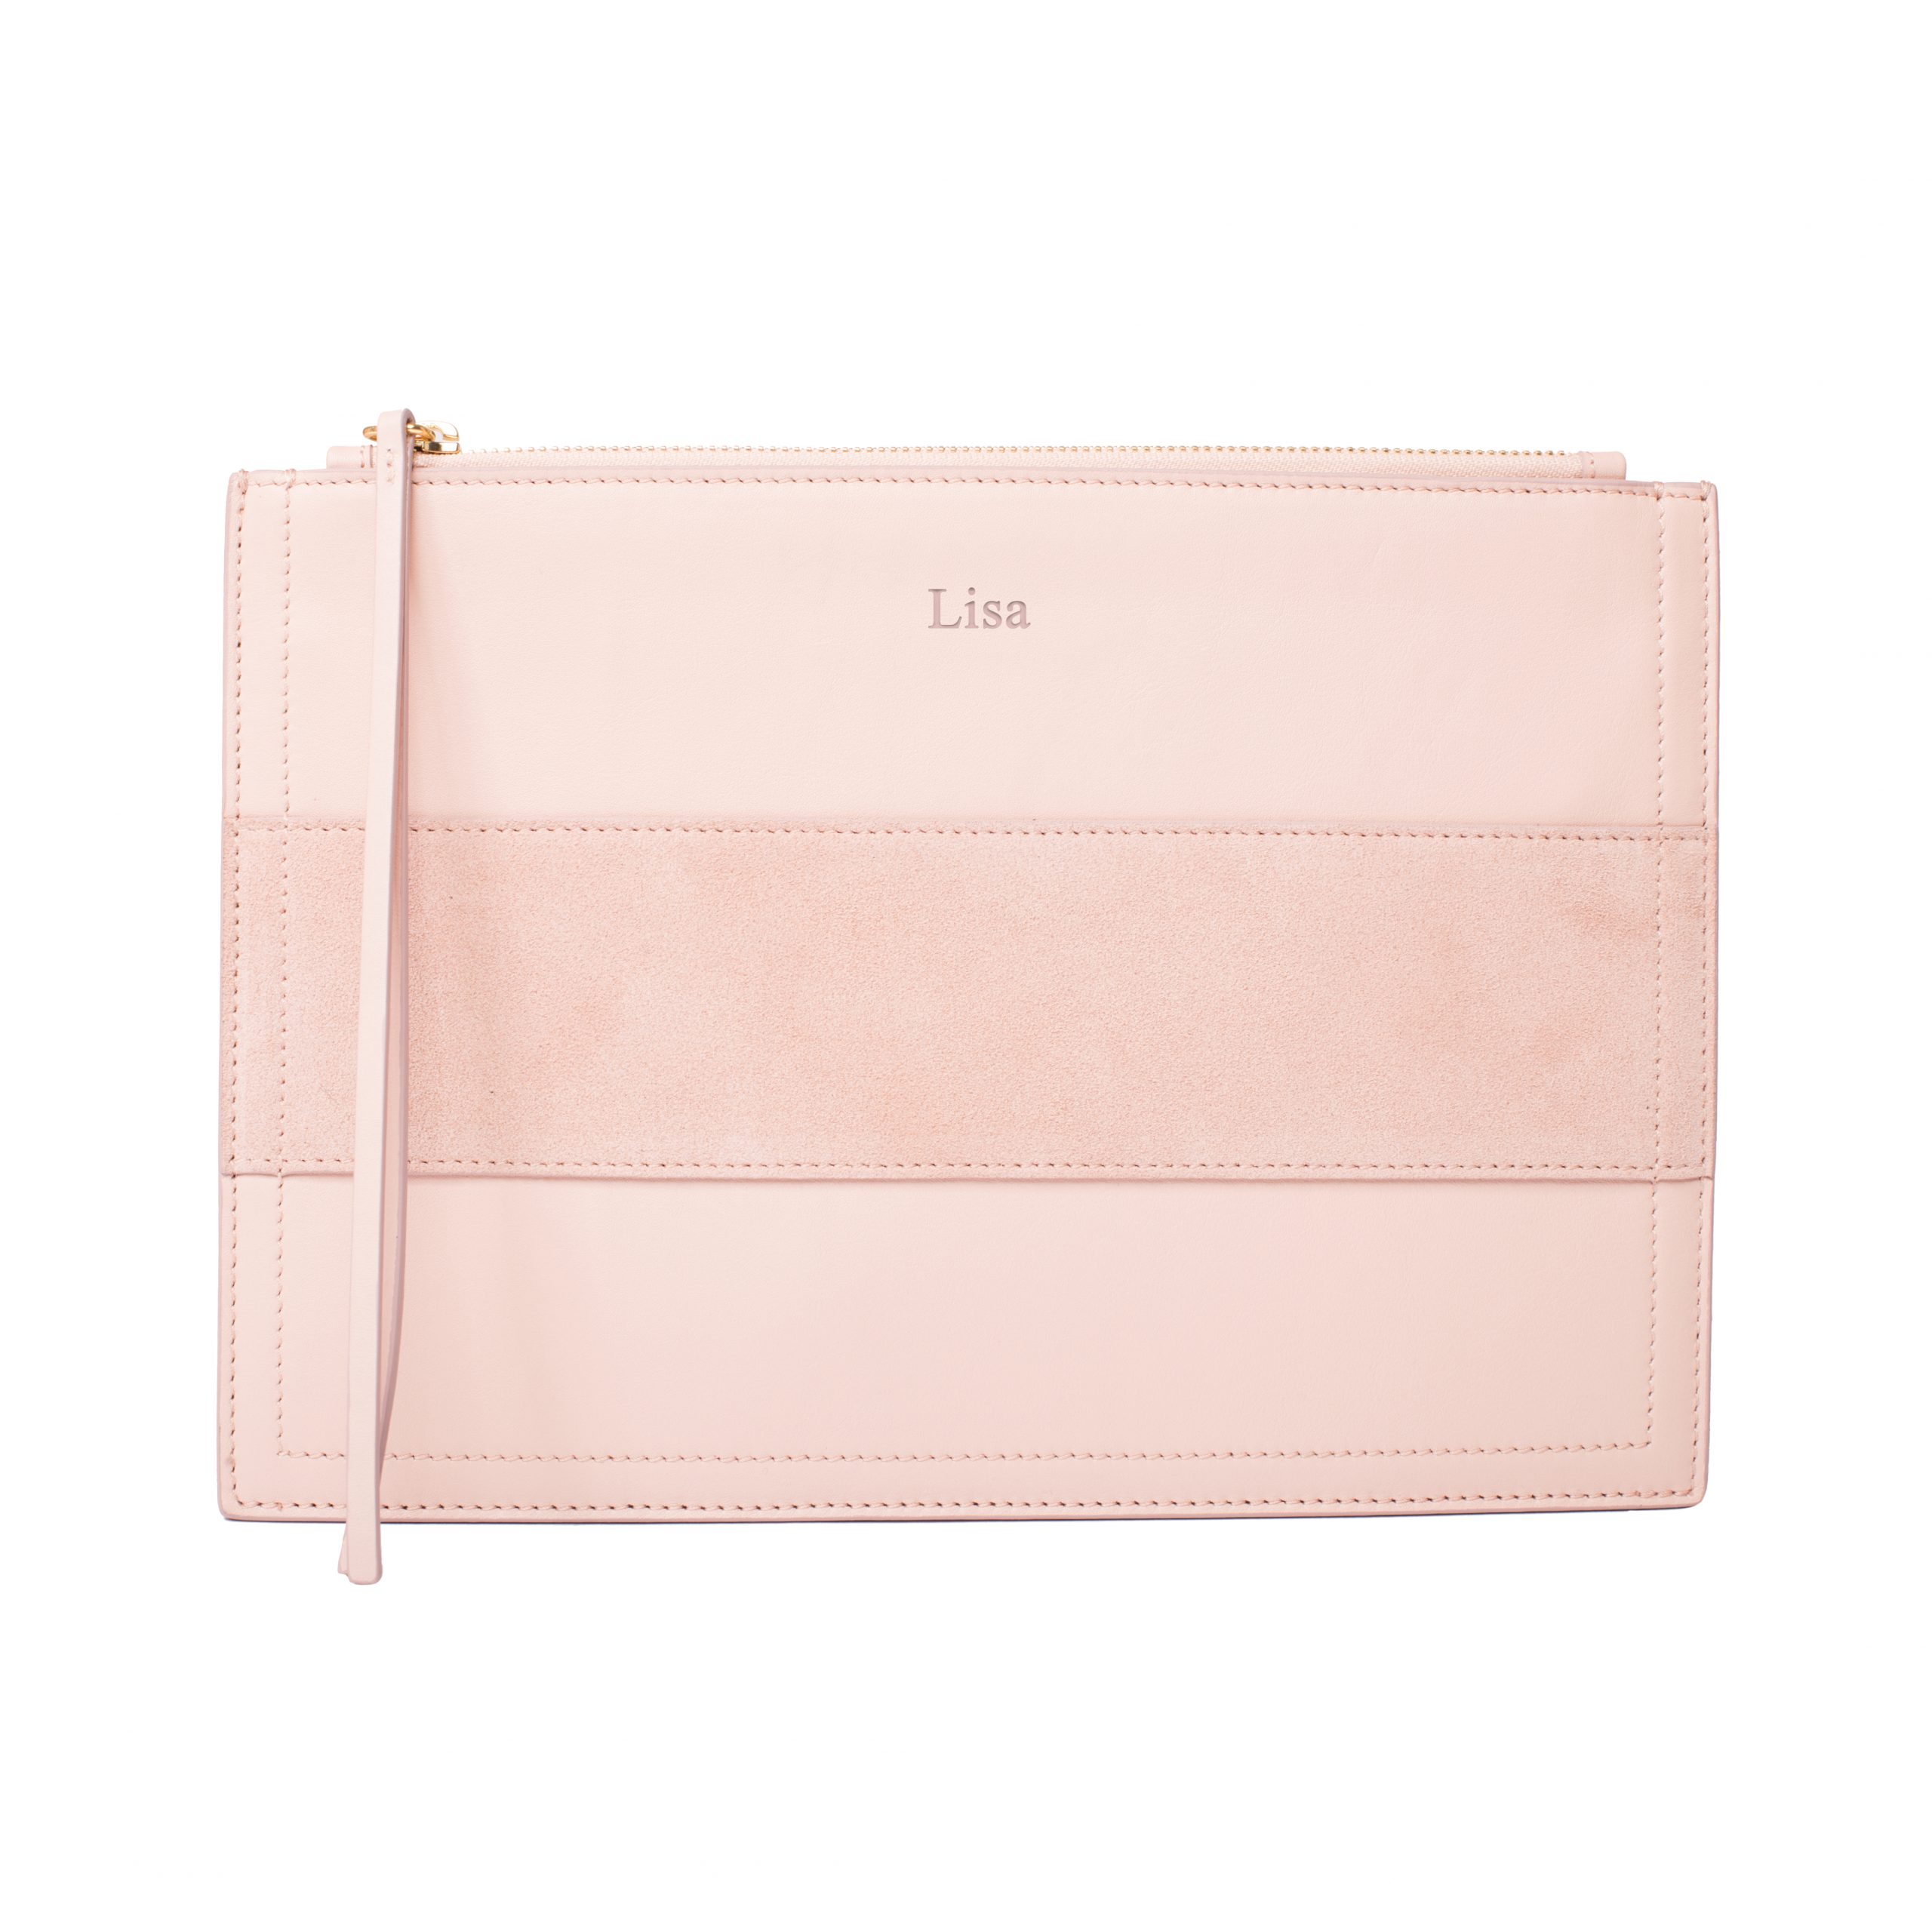 MERSOR - Personalized Leather Pouch - Soft Blush & Gold | ABOUT ICONS